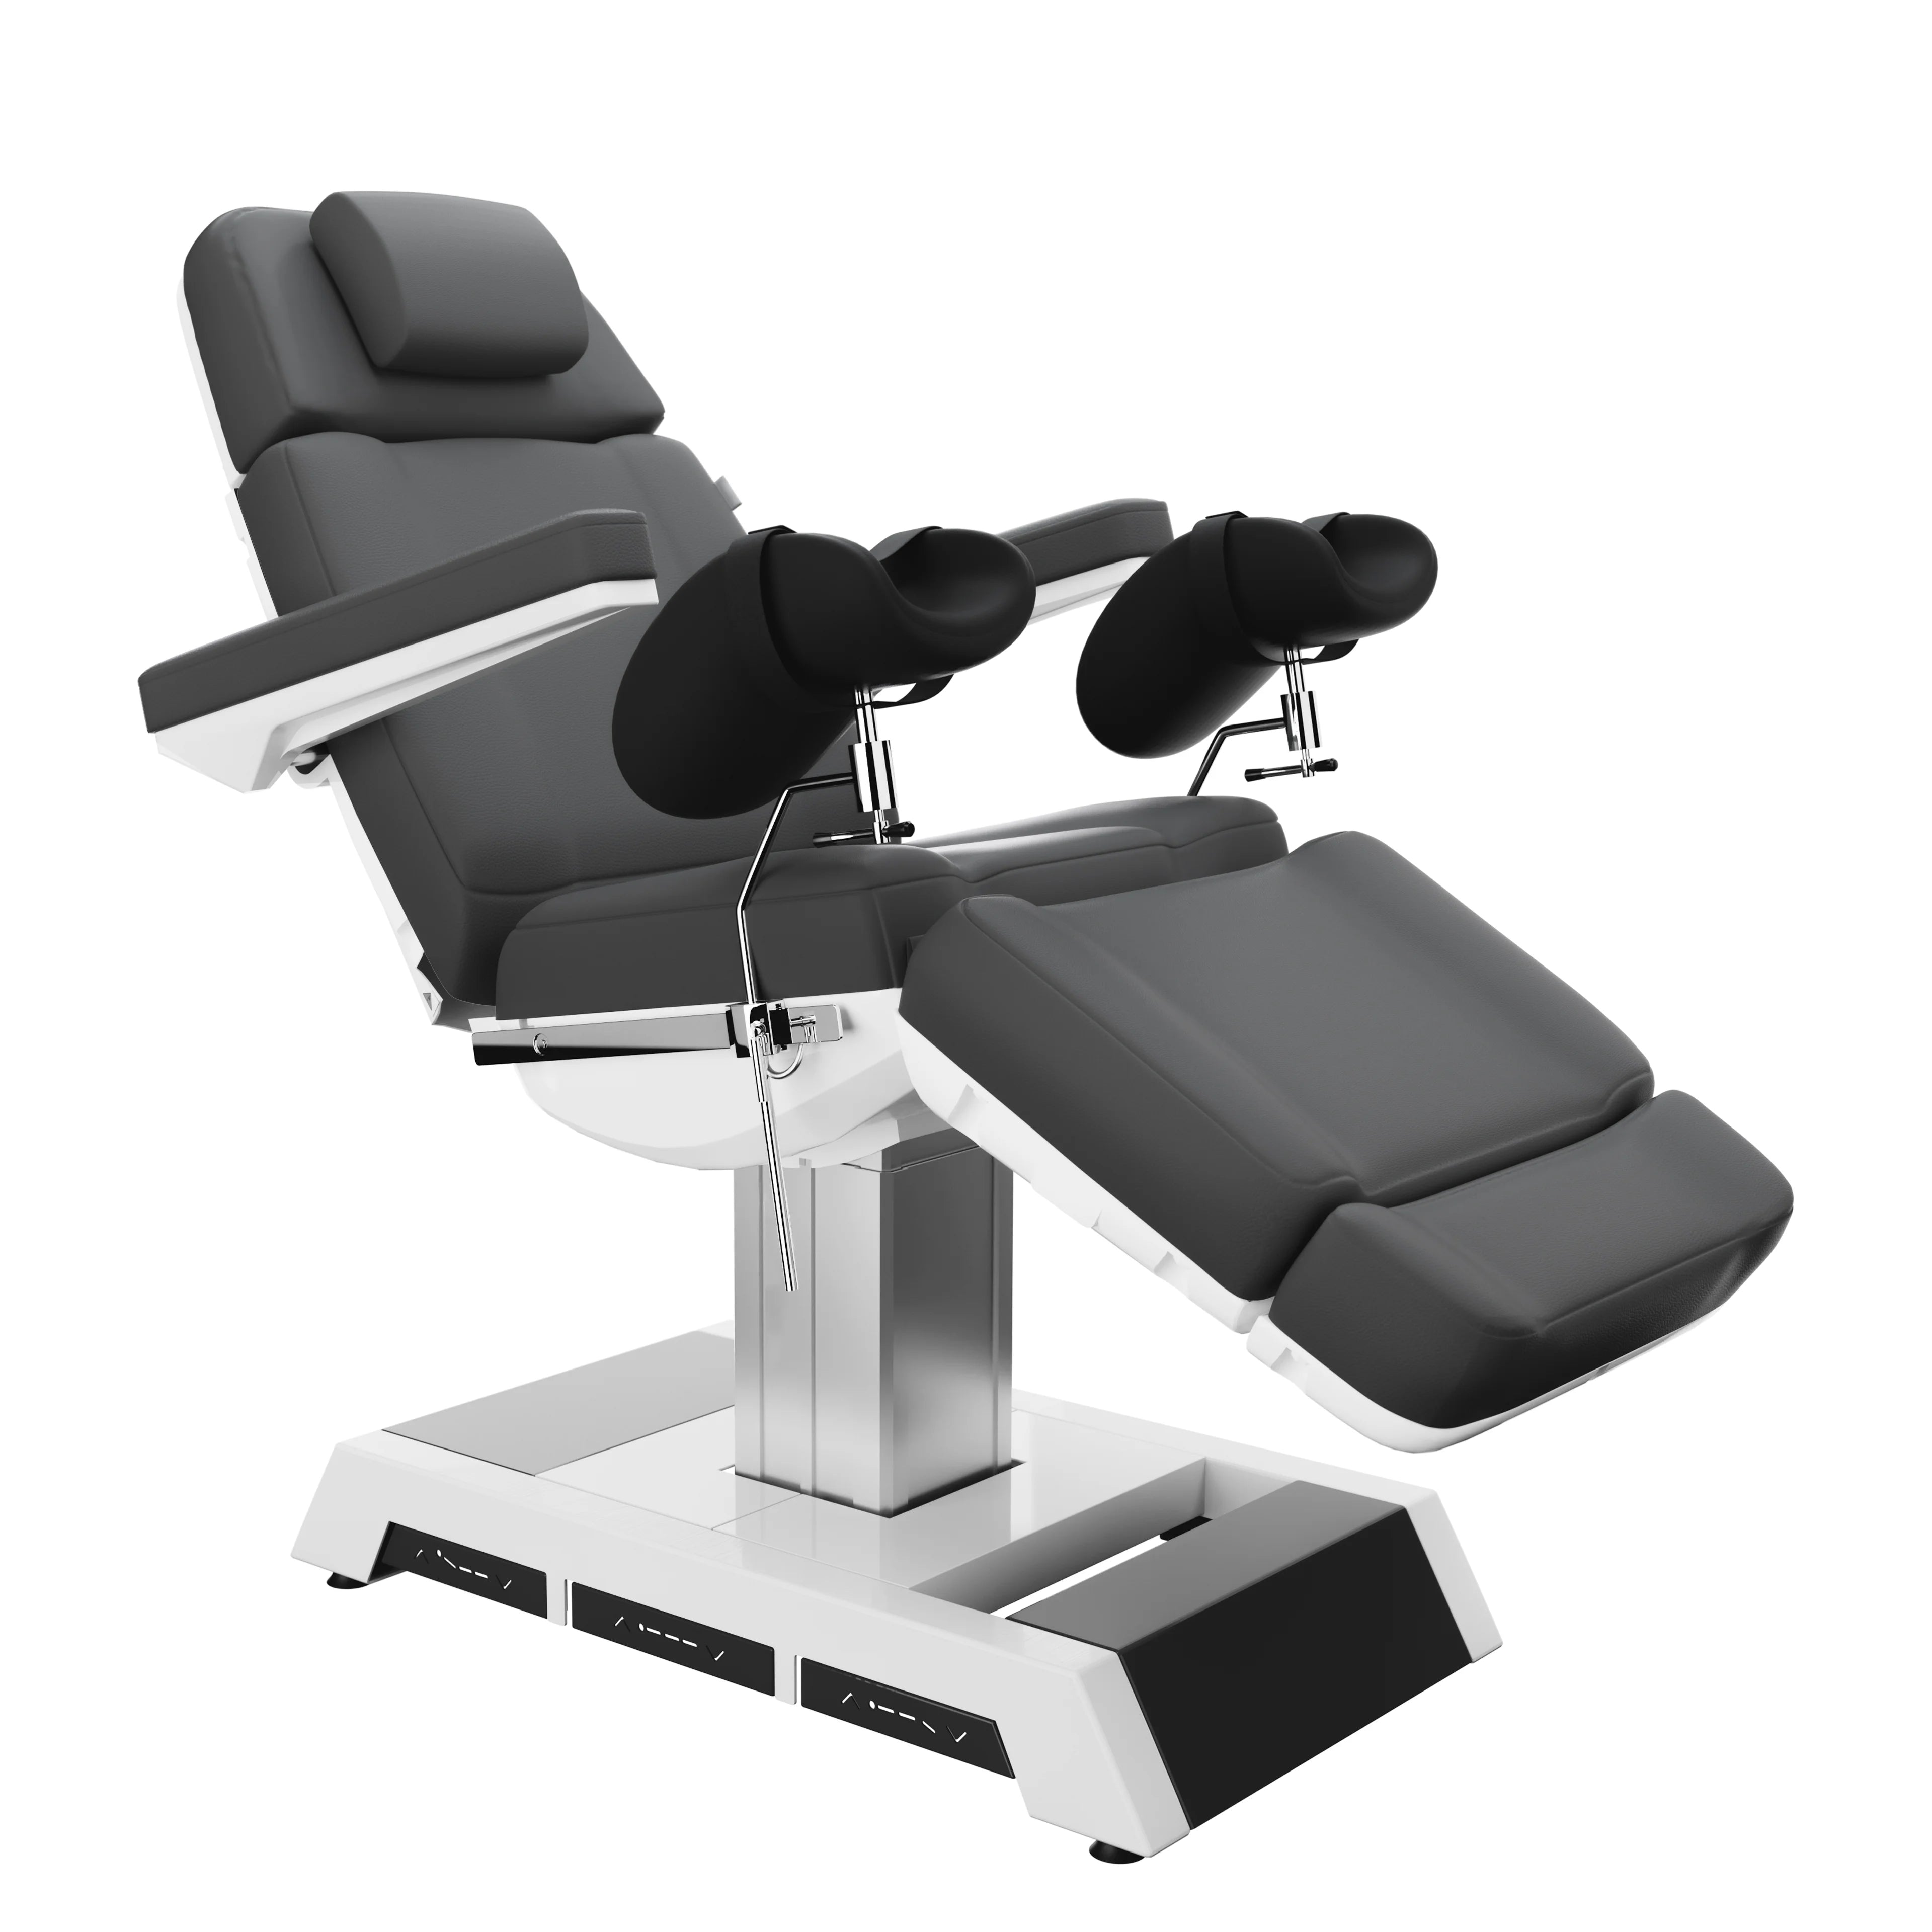 SPAMARC . Adones (Gray) . OBGYN & GYNECOLOGY . STIRRUPS . 4 MOTOR SPA TREATMENT CHAIR/BED